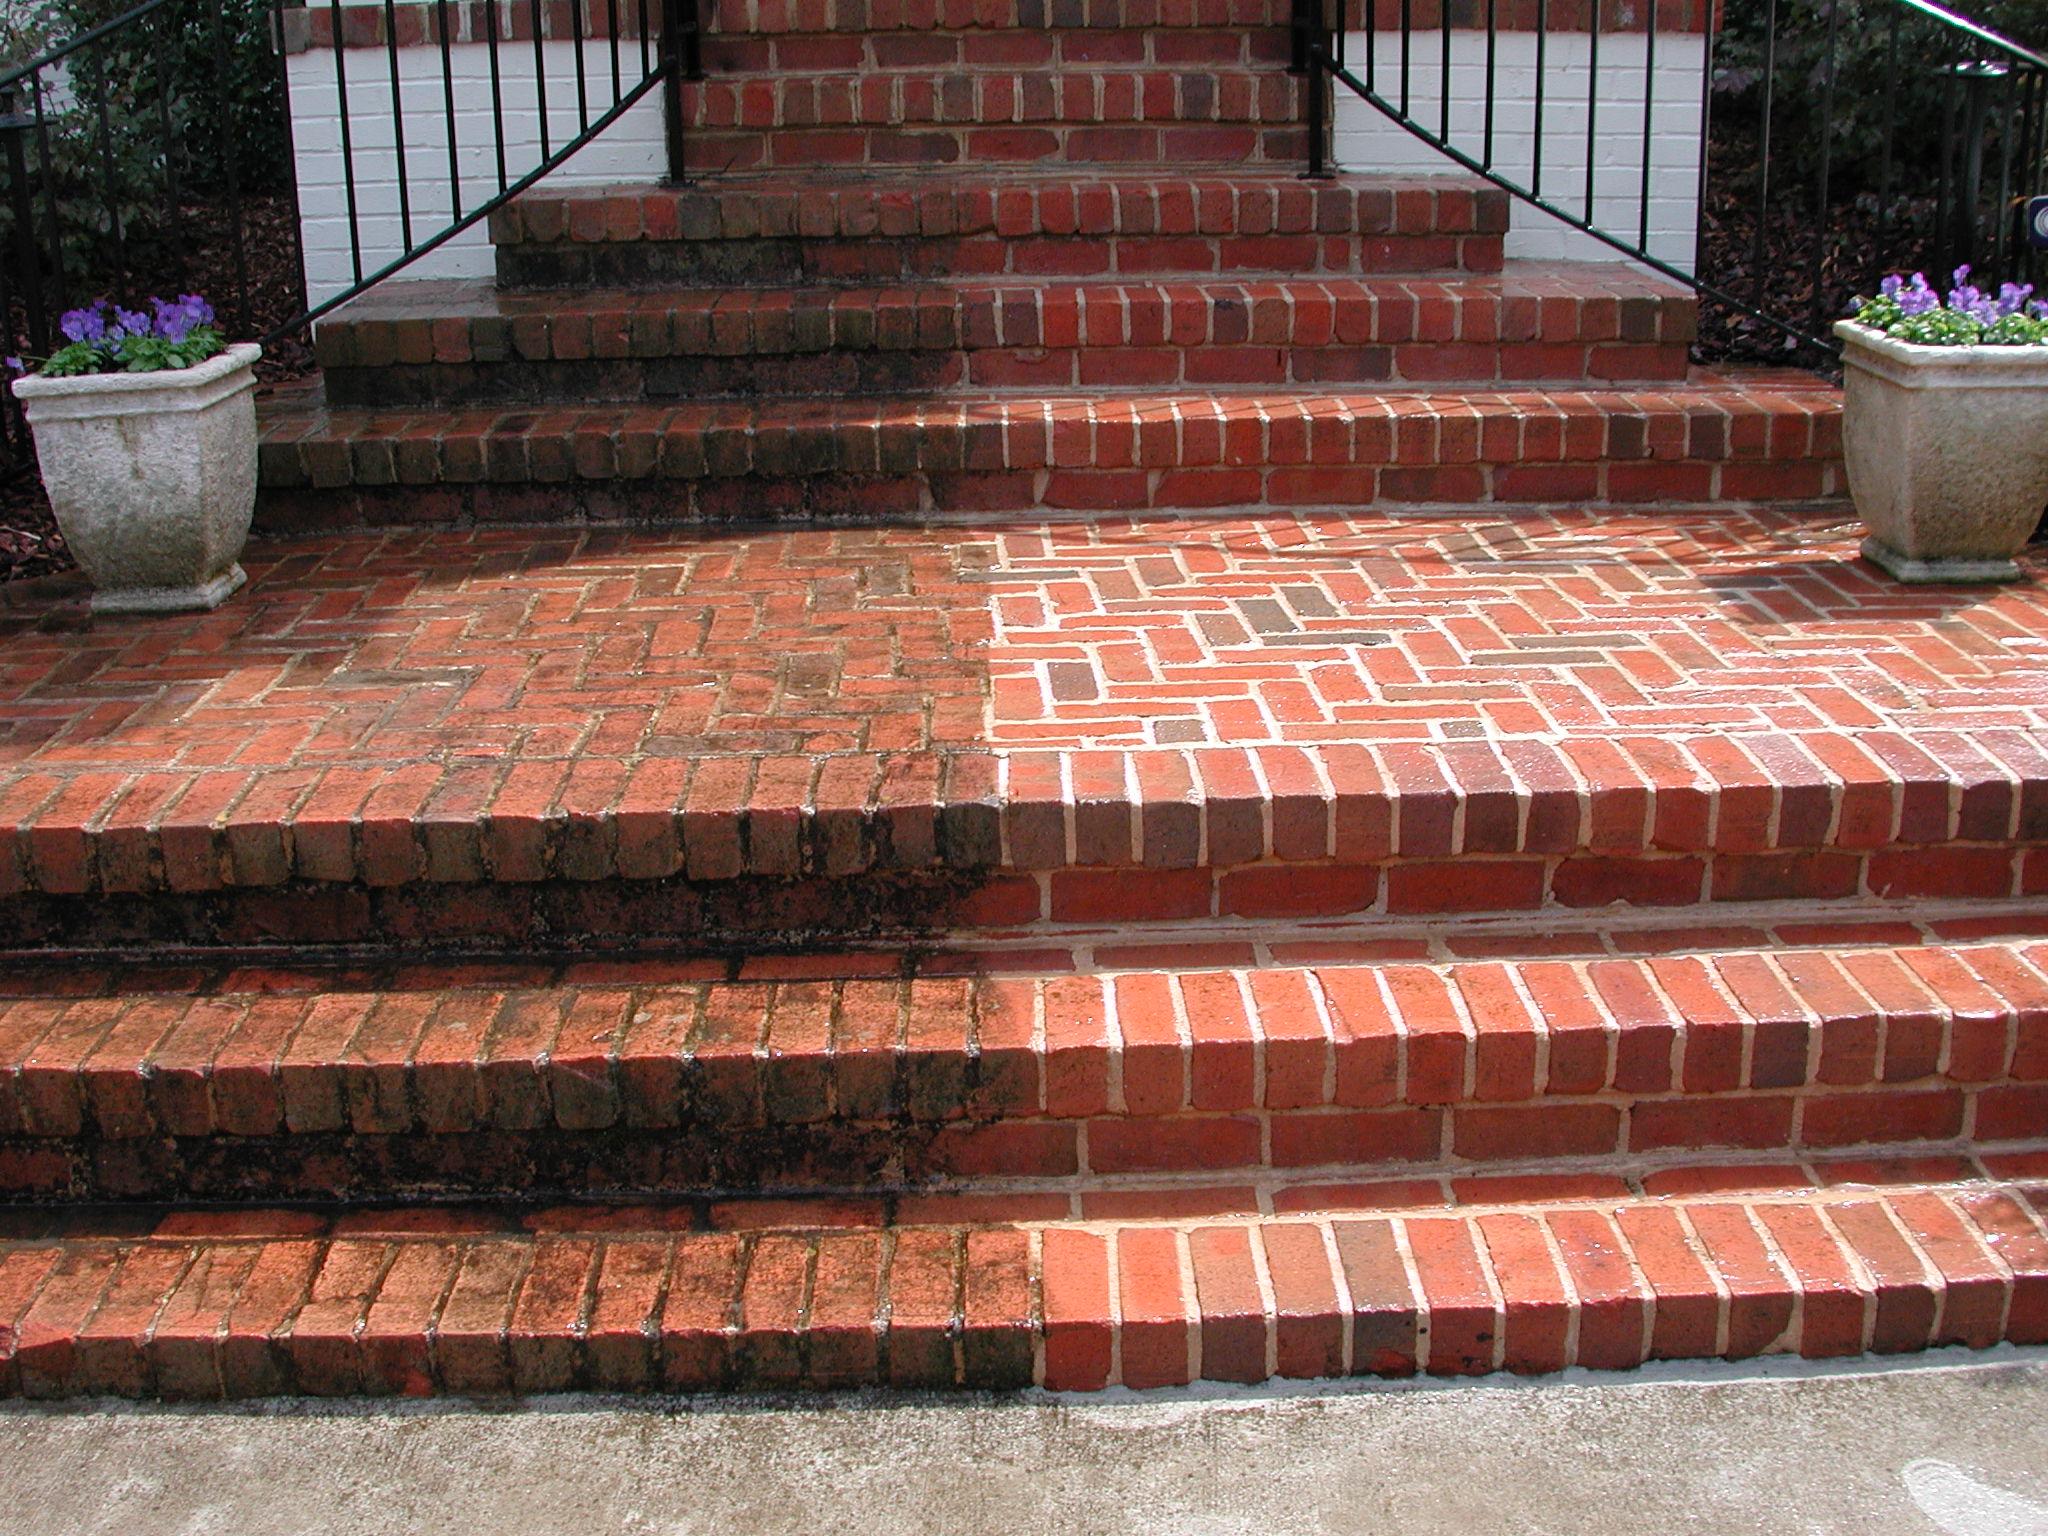 Tile over concrete stairs